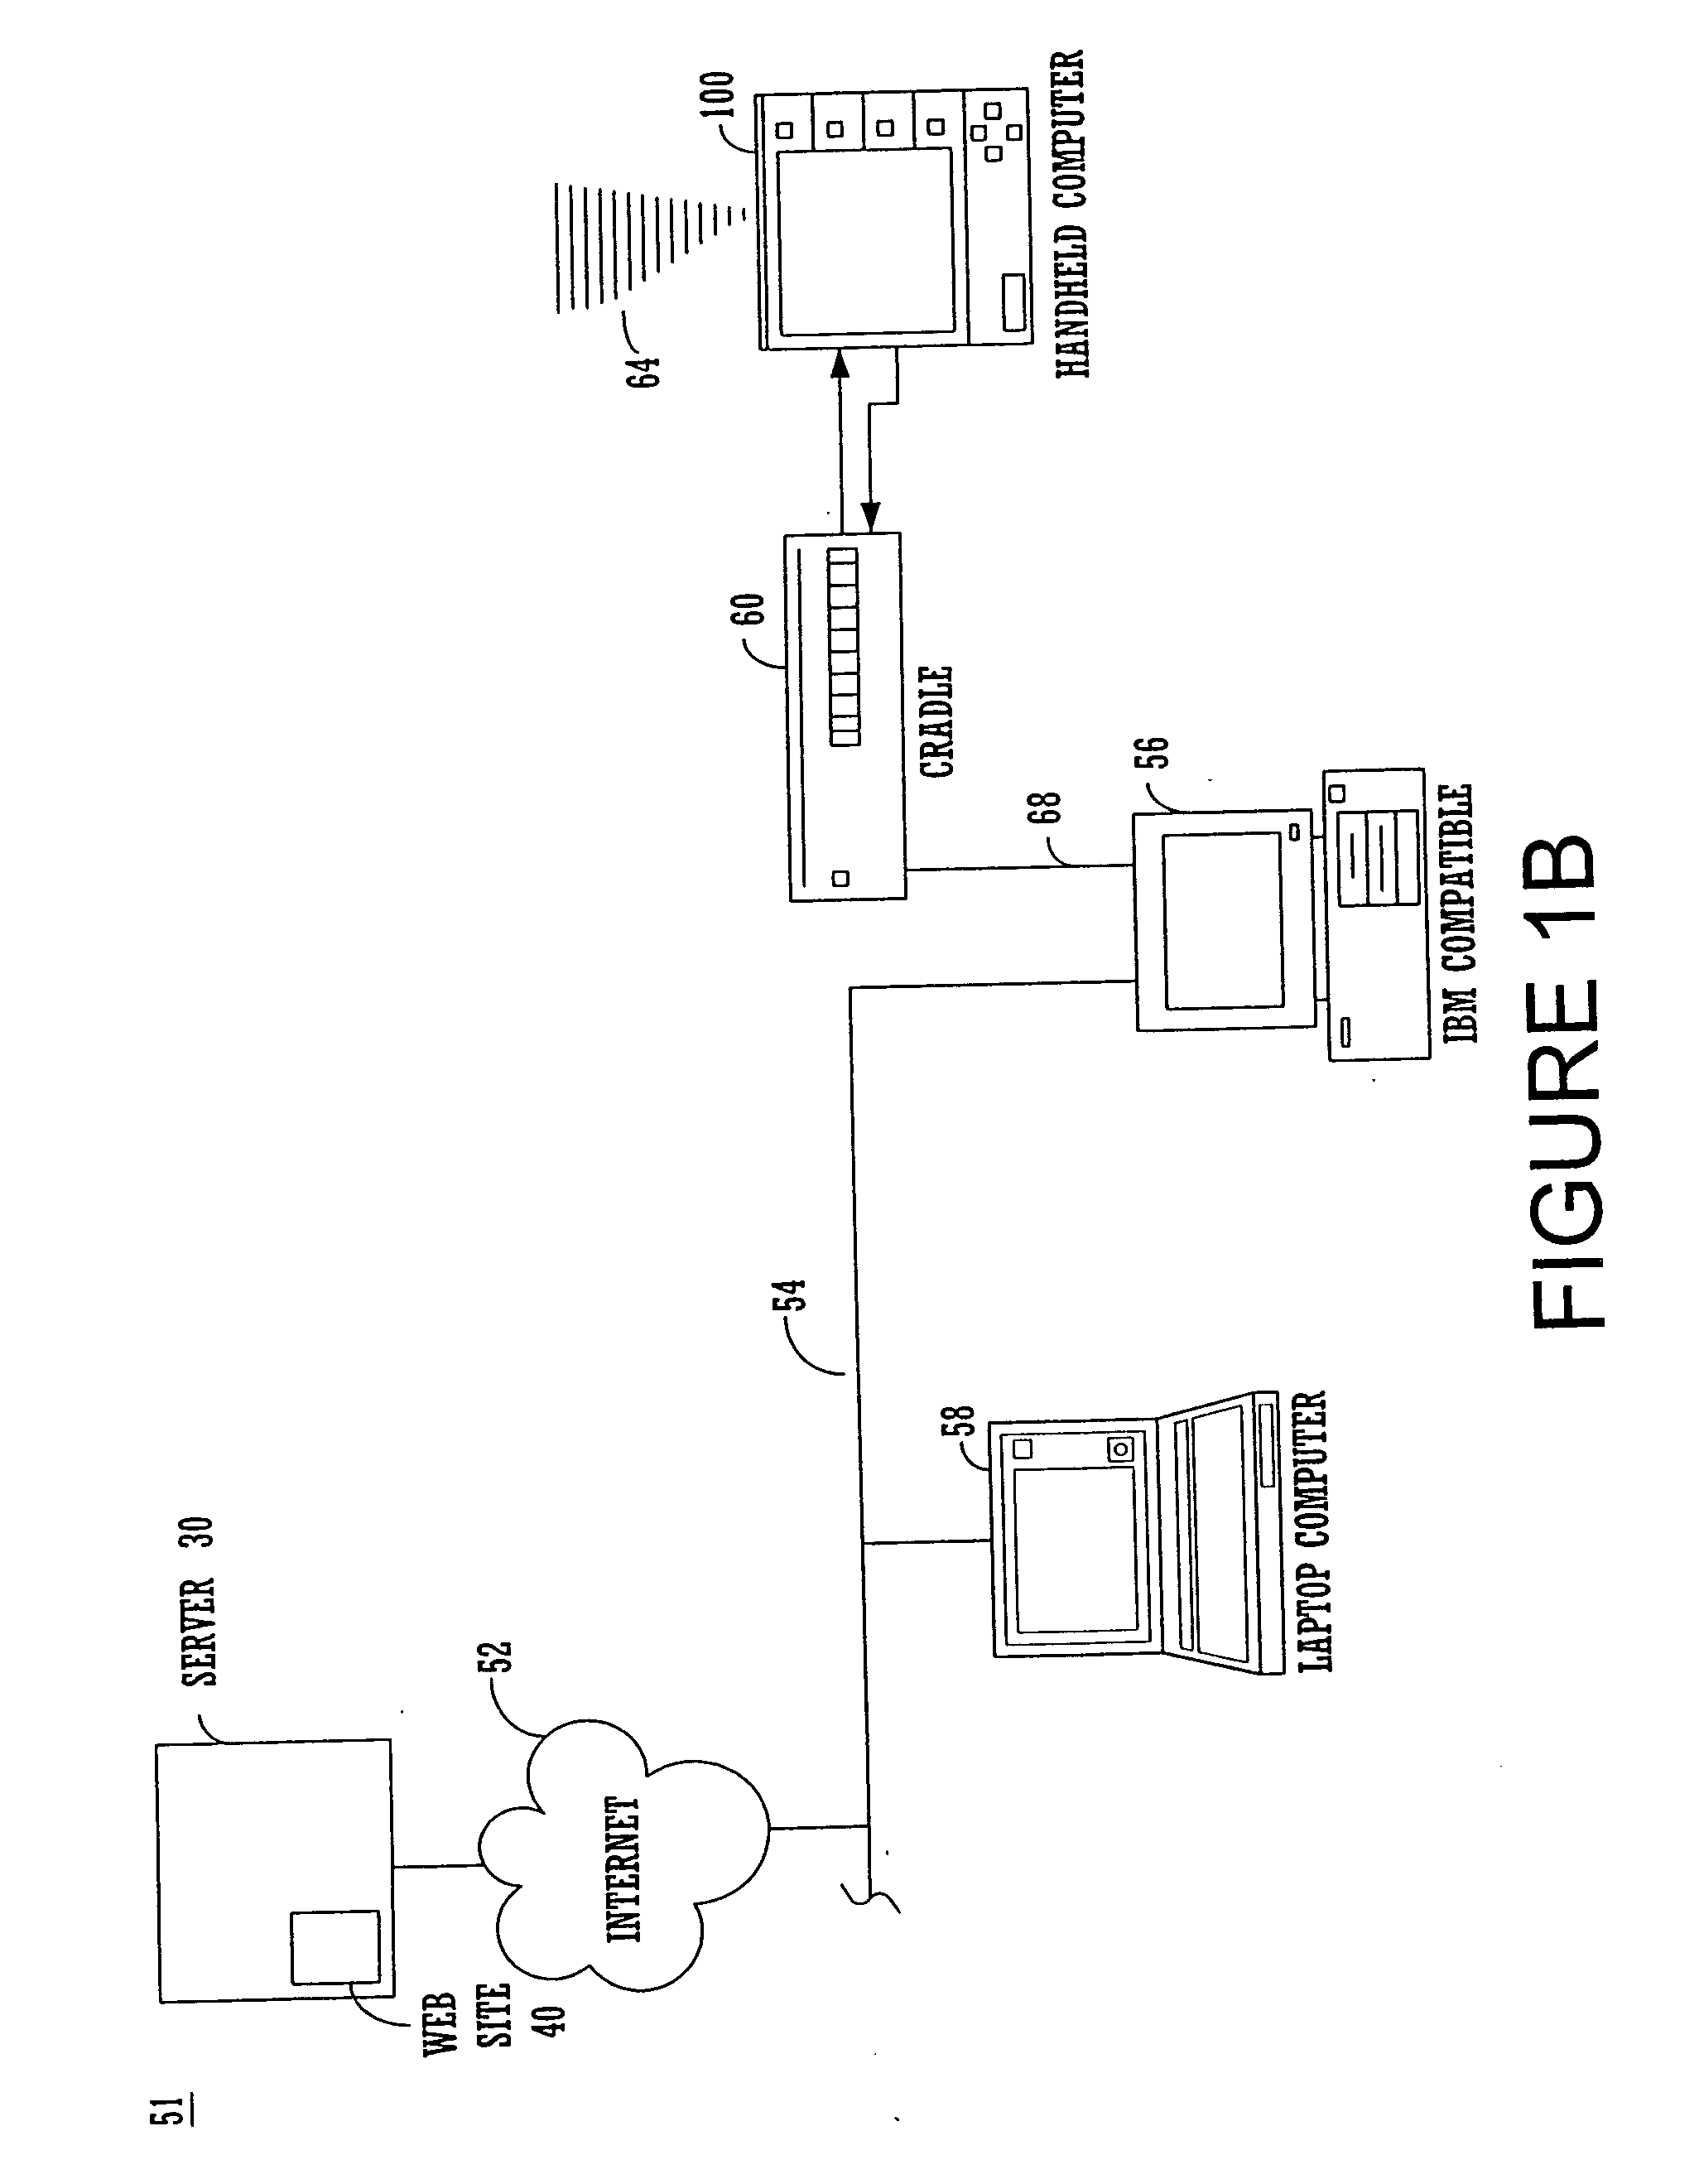 Method and system for on screen text correction via pen interface